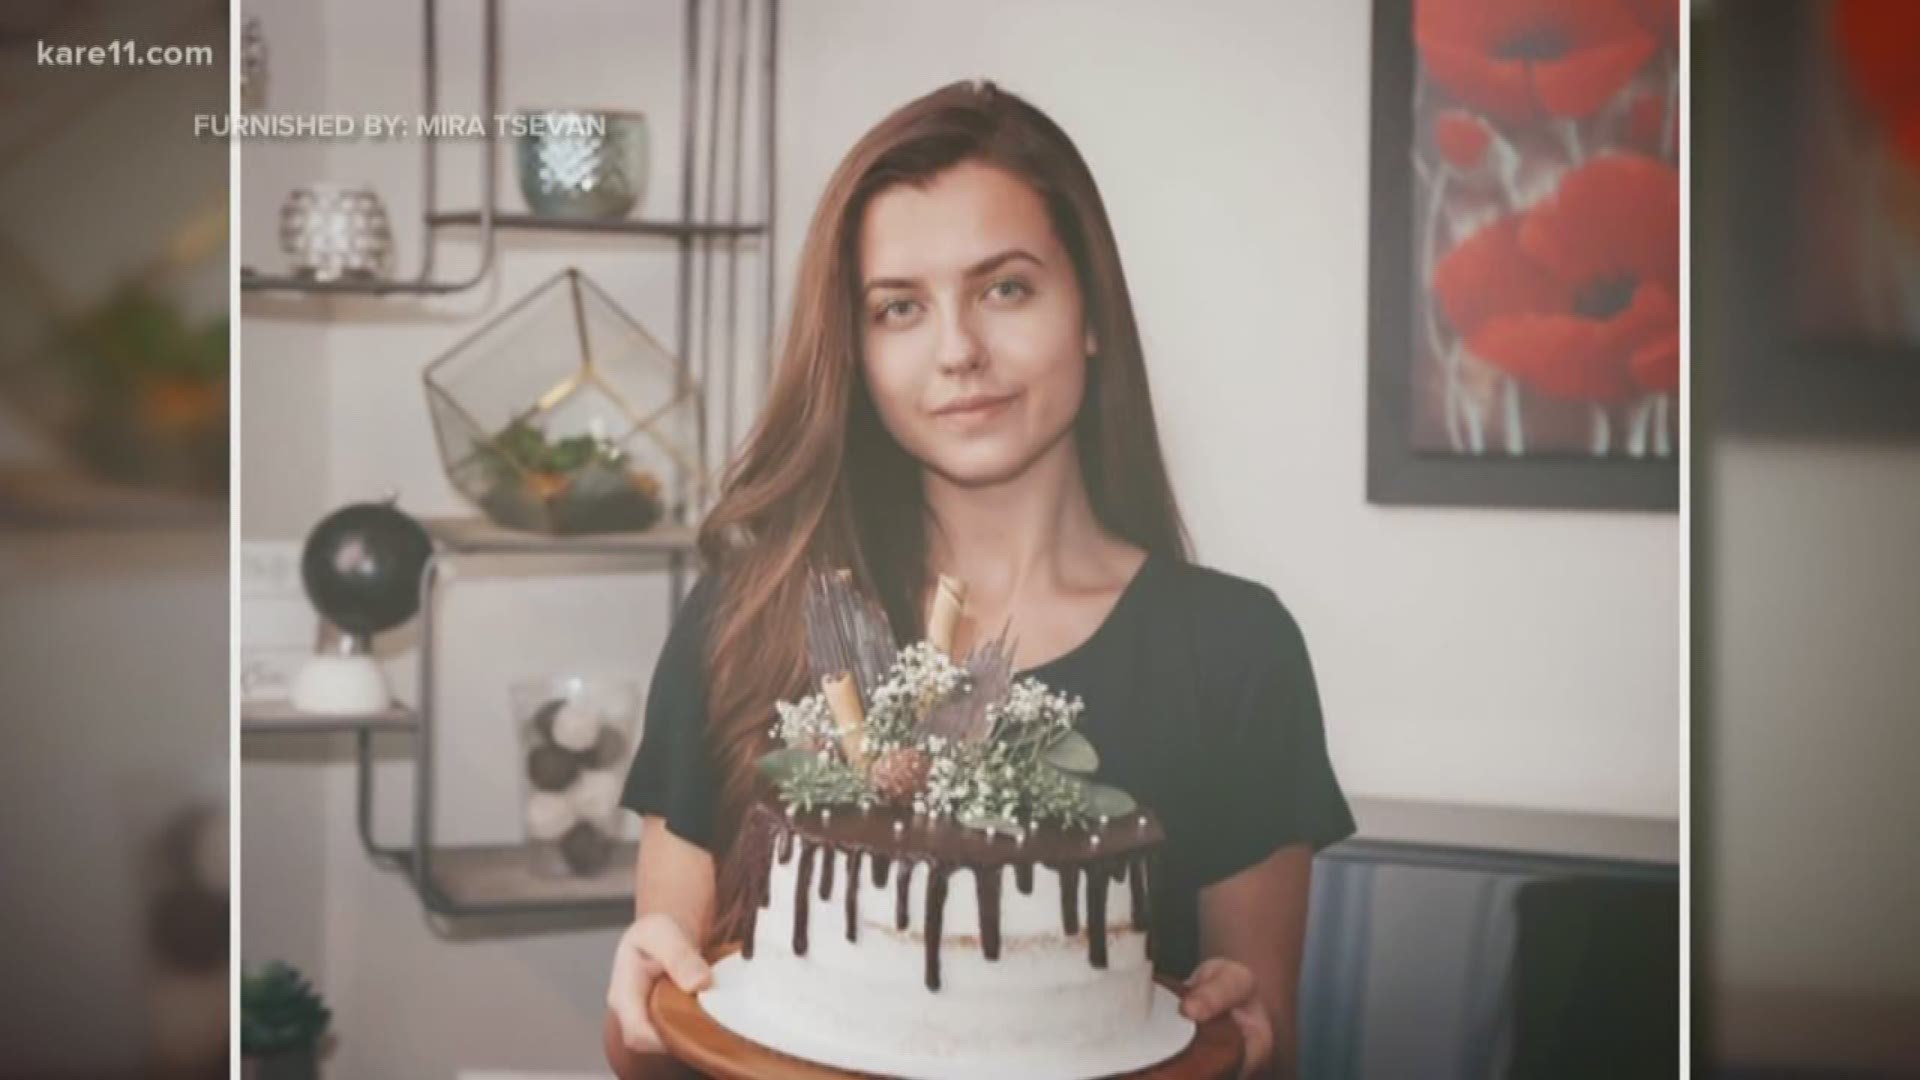 Mira Tsevan might just be coming to a baking reality show near you. It might not be right away, because she's not even old enough to drive a car to an audition. But what she lacks in age, she makes up for in talent.